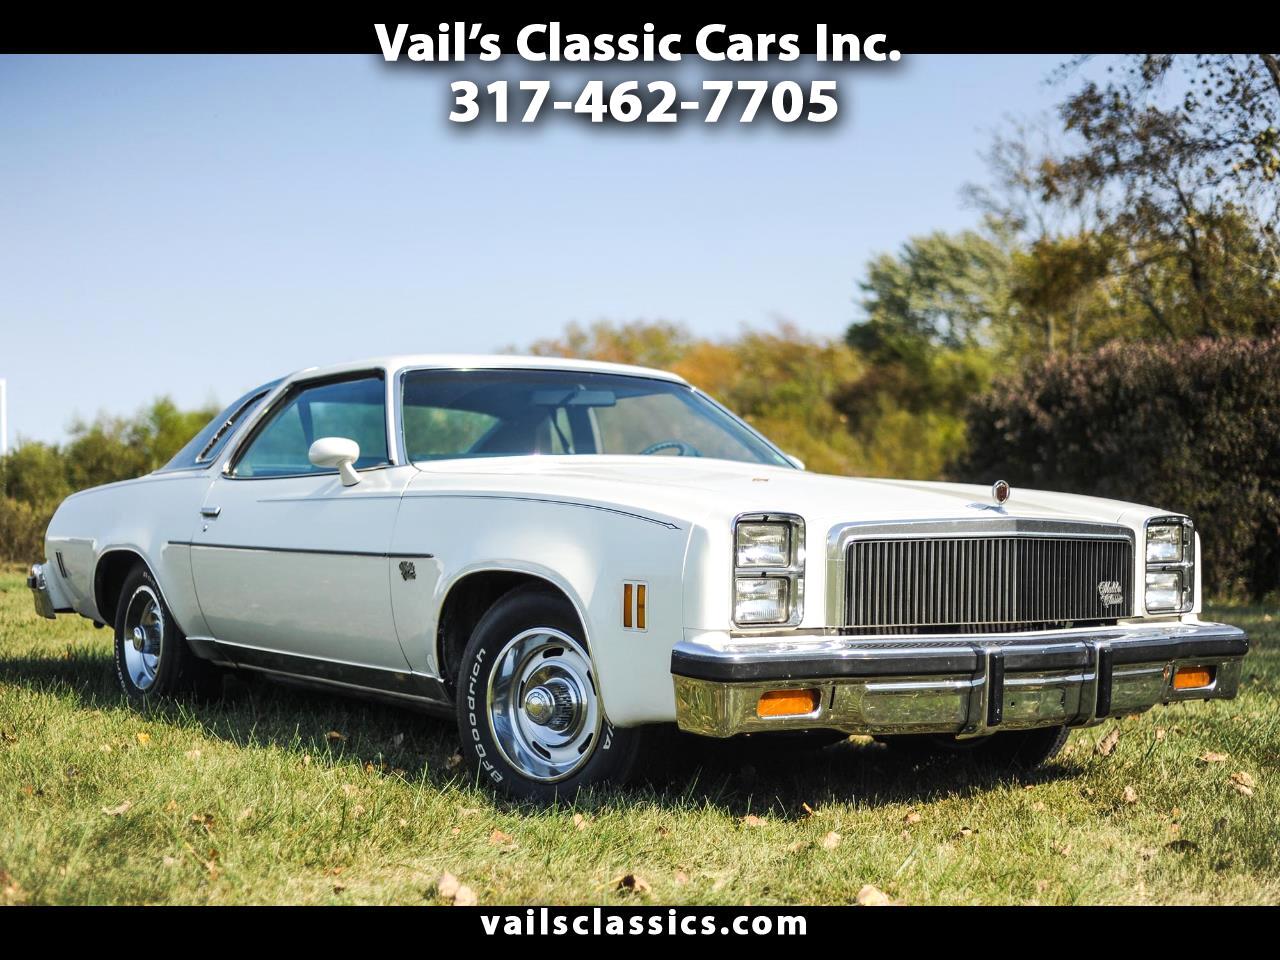 Used 1977 Chevrolet Malibu Classic Sold in Greenfield IN 46140 Vail's  Classic Cars Inc.